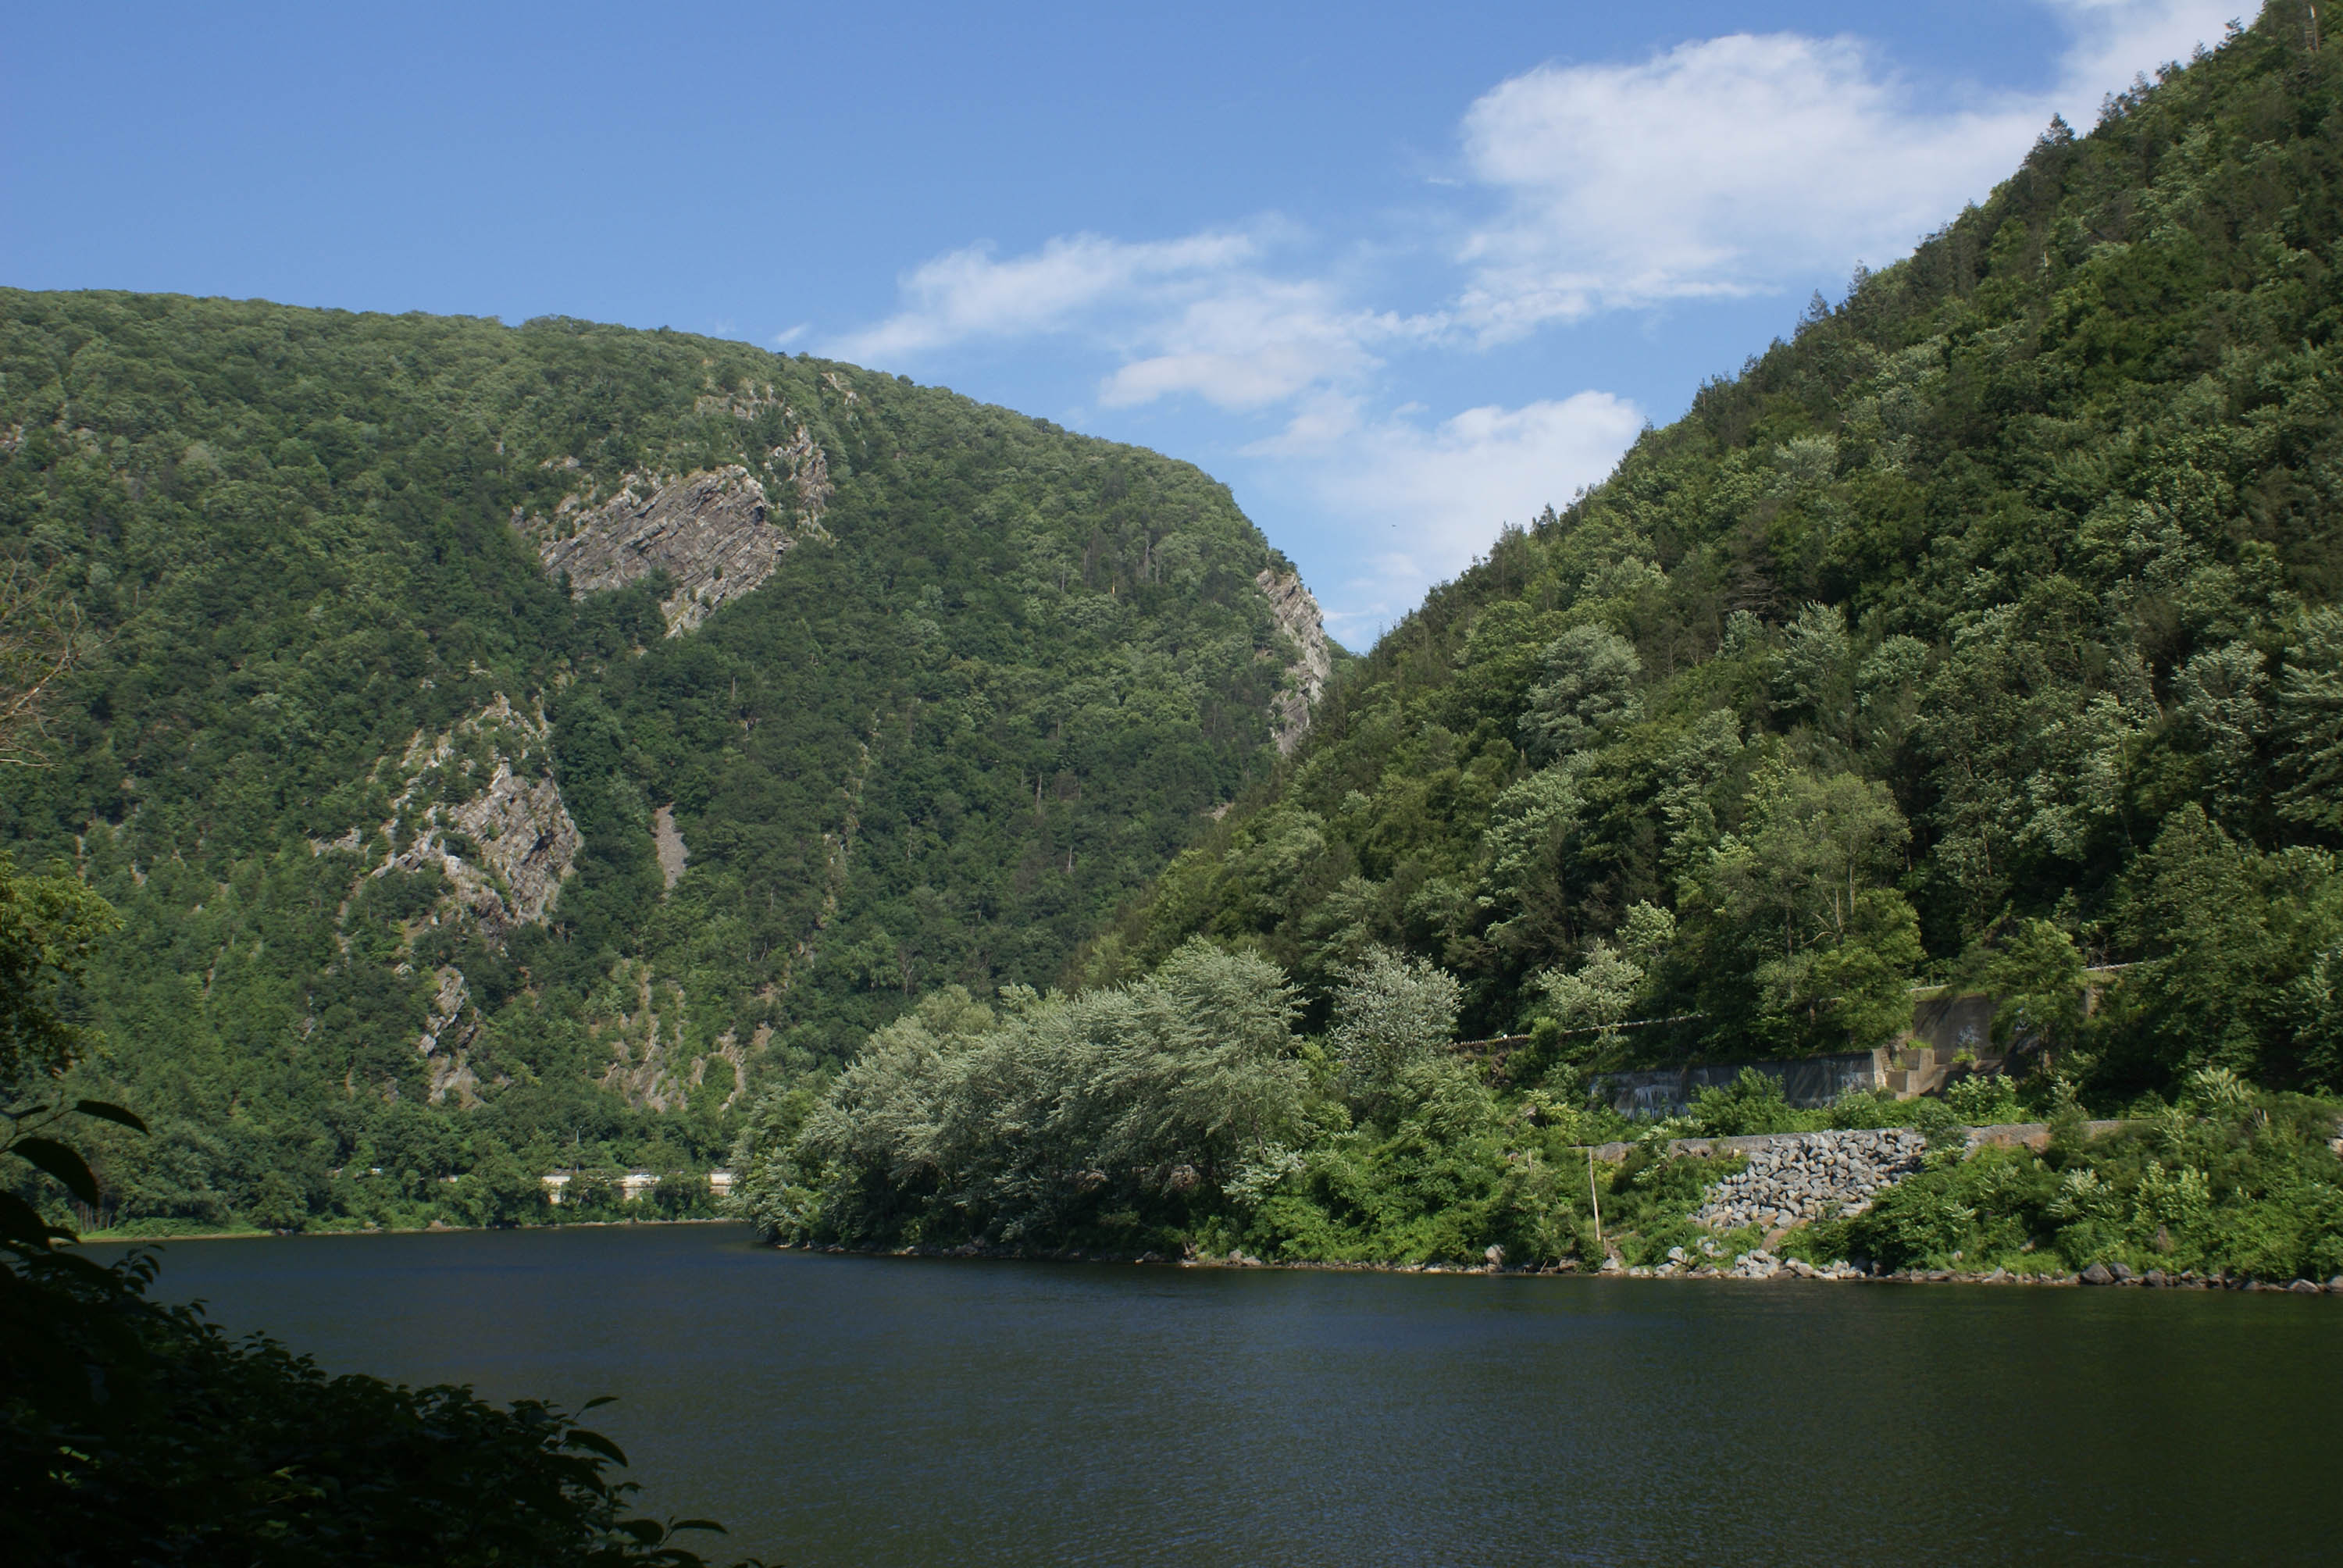 View of the Delaware River cutting between two low mountain peaks